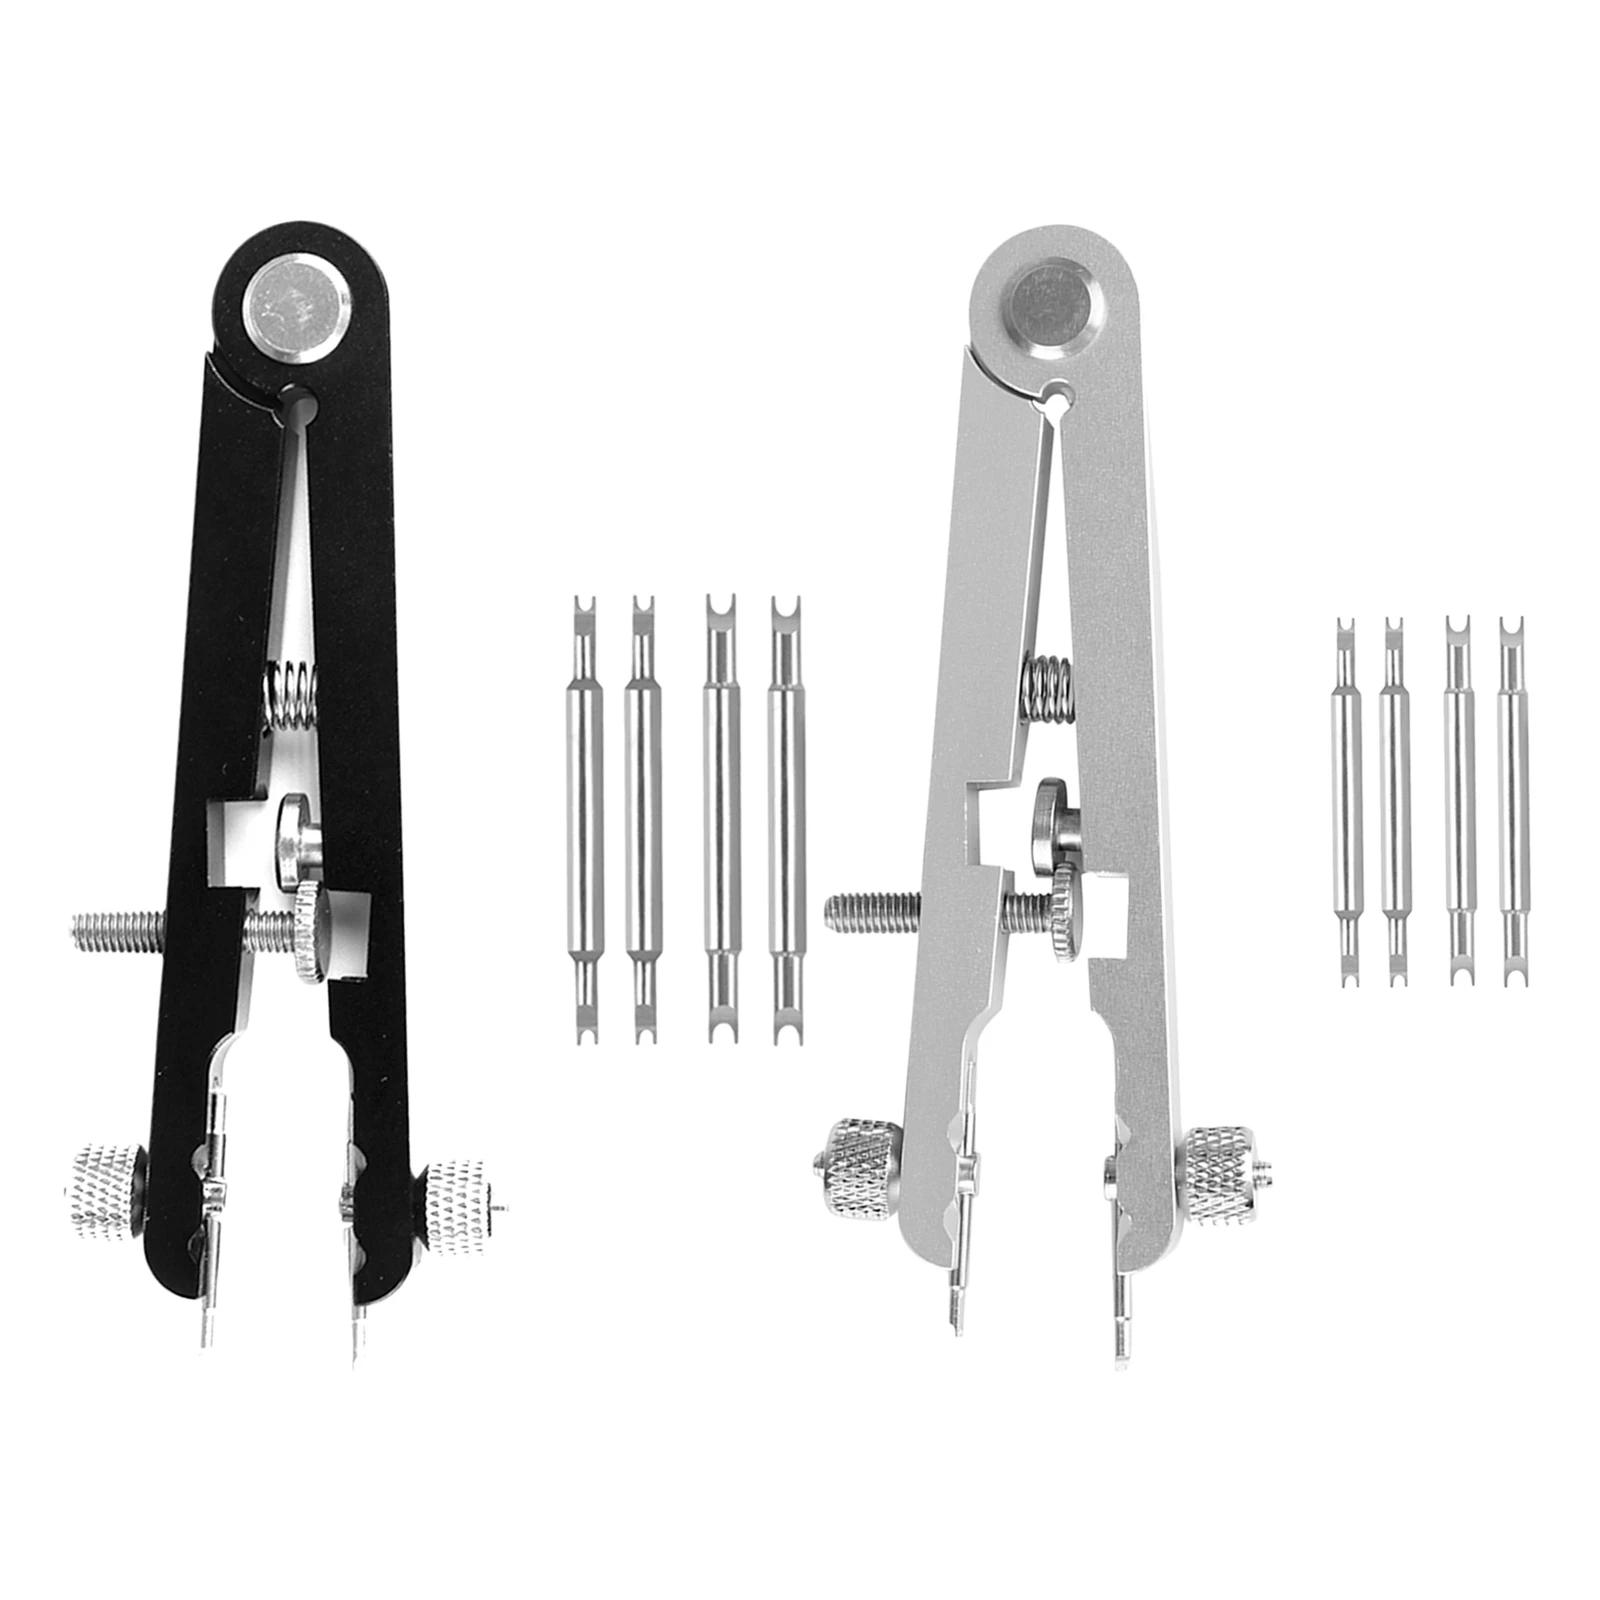 Watch Bracelet Spring Bar Plier Remover Tweezer Removing Tool with Tips Pins